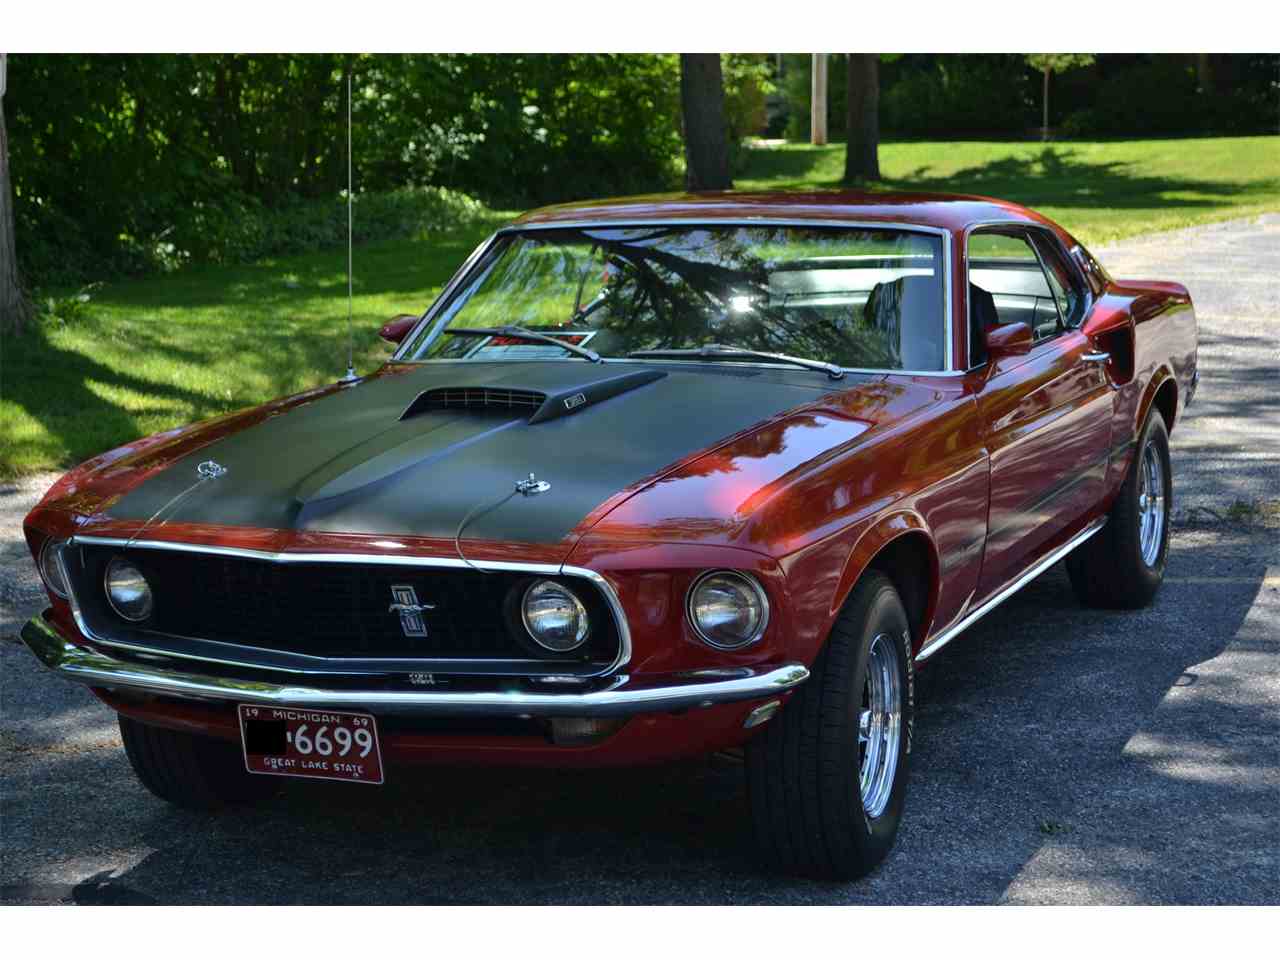 1969 Ford Mustang Mach 1 for Sale | ClassicCars.com | CC-886570